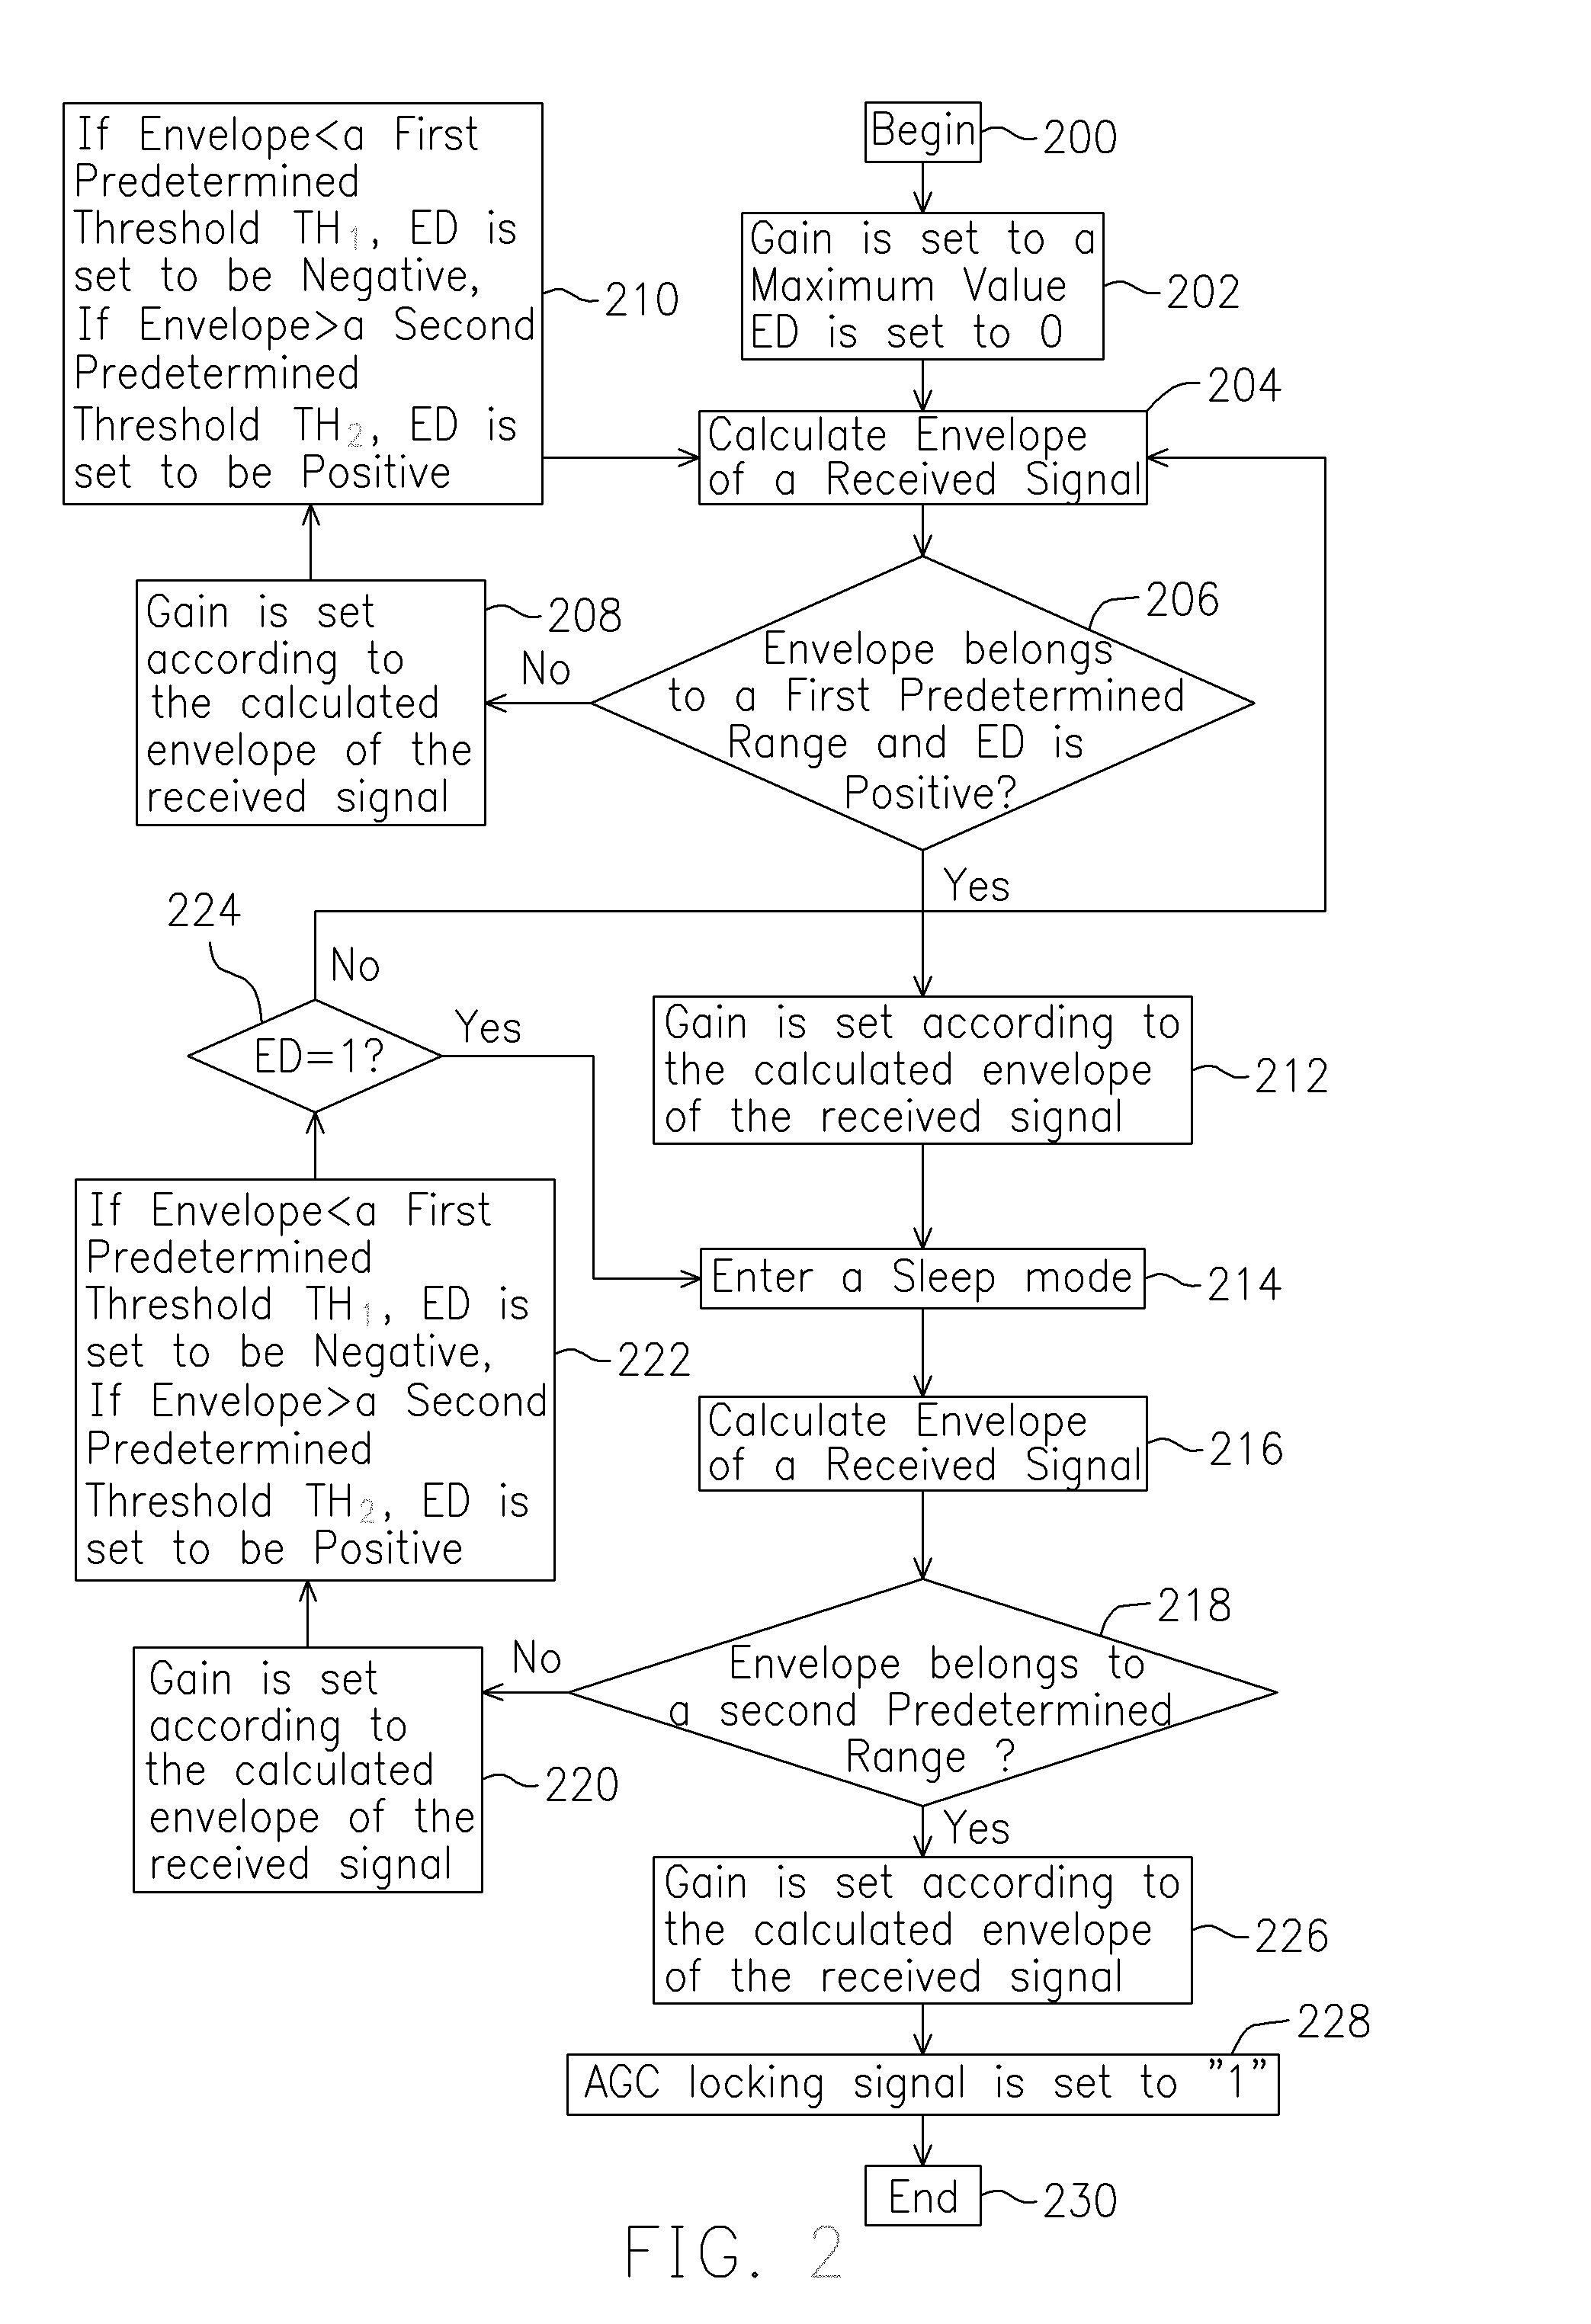 Automatic gain control mechanism for an analog-to-digital converter